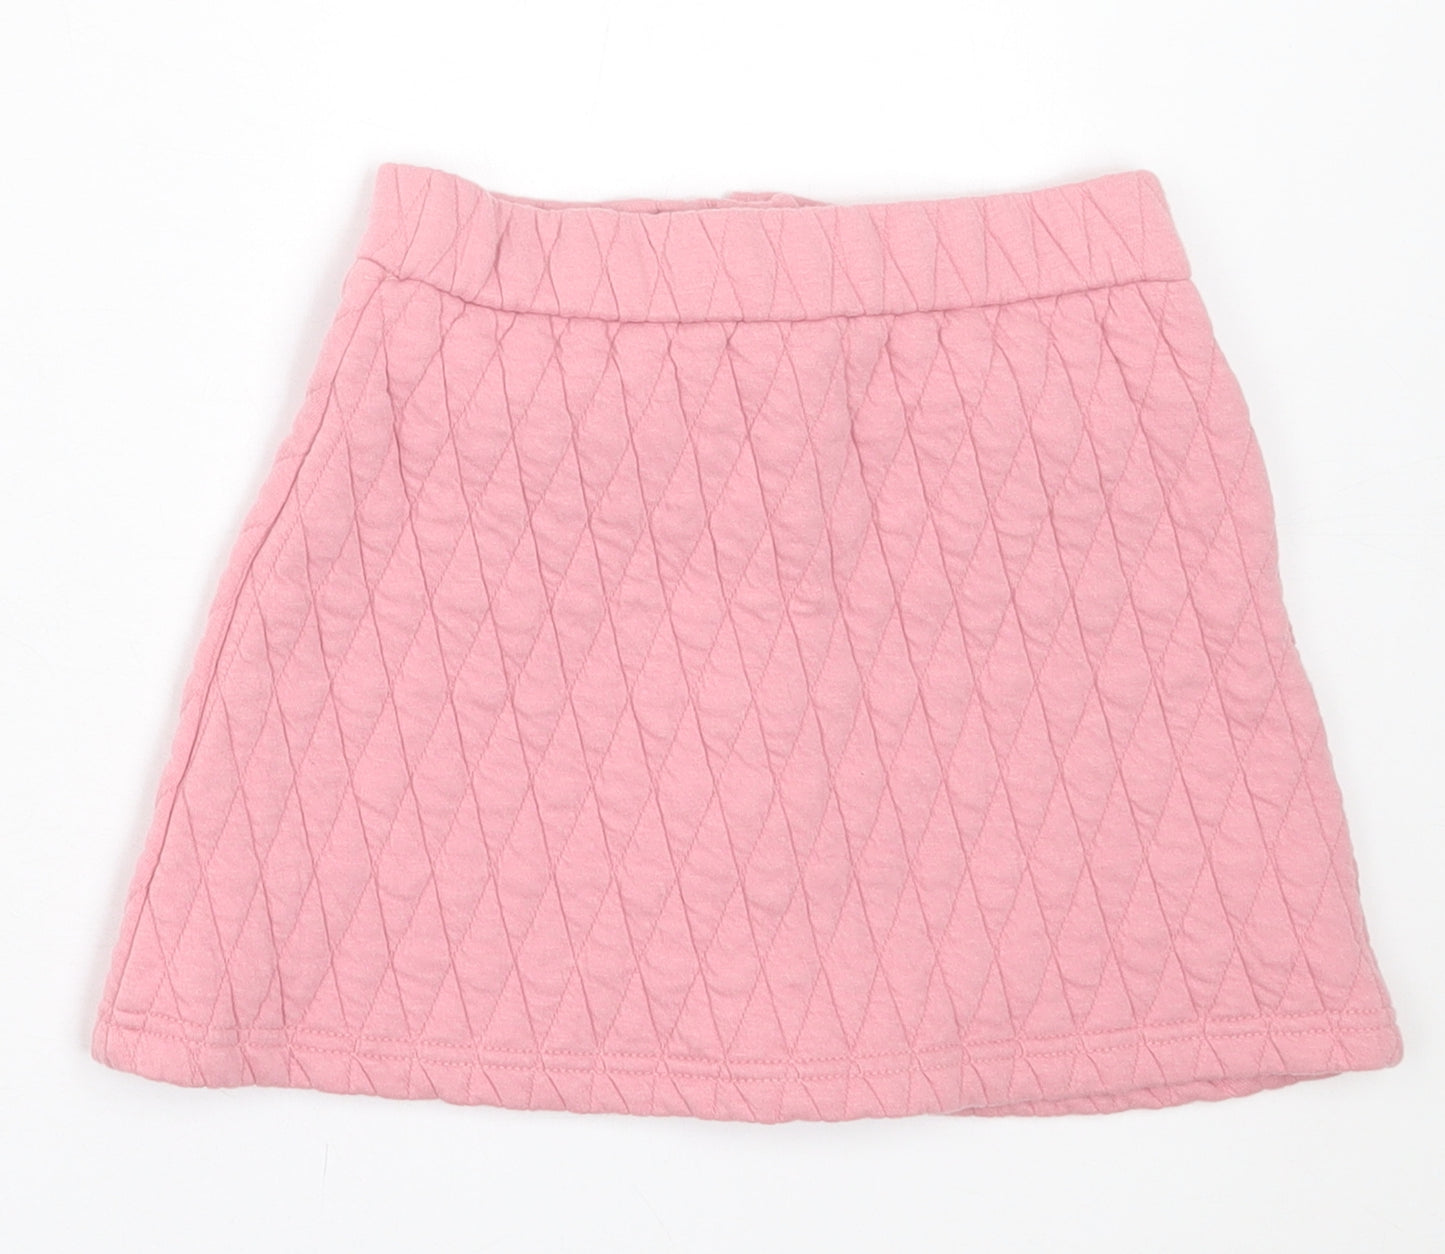 Dunnes Stores Girls Pink Polyester A-Line Skirt Size 4-5 Years Regular Button